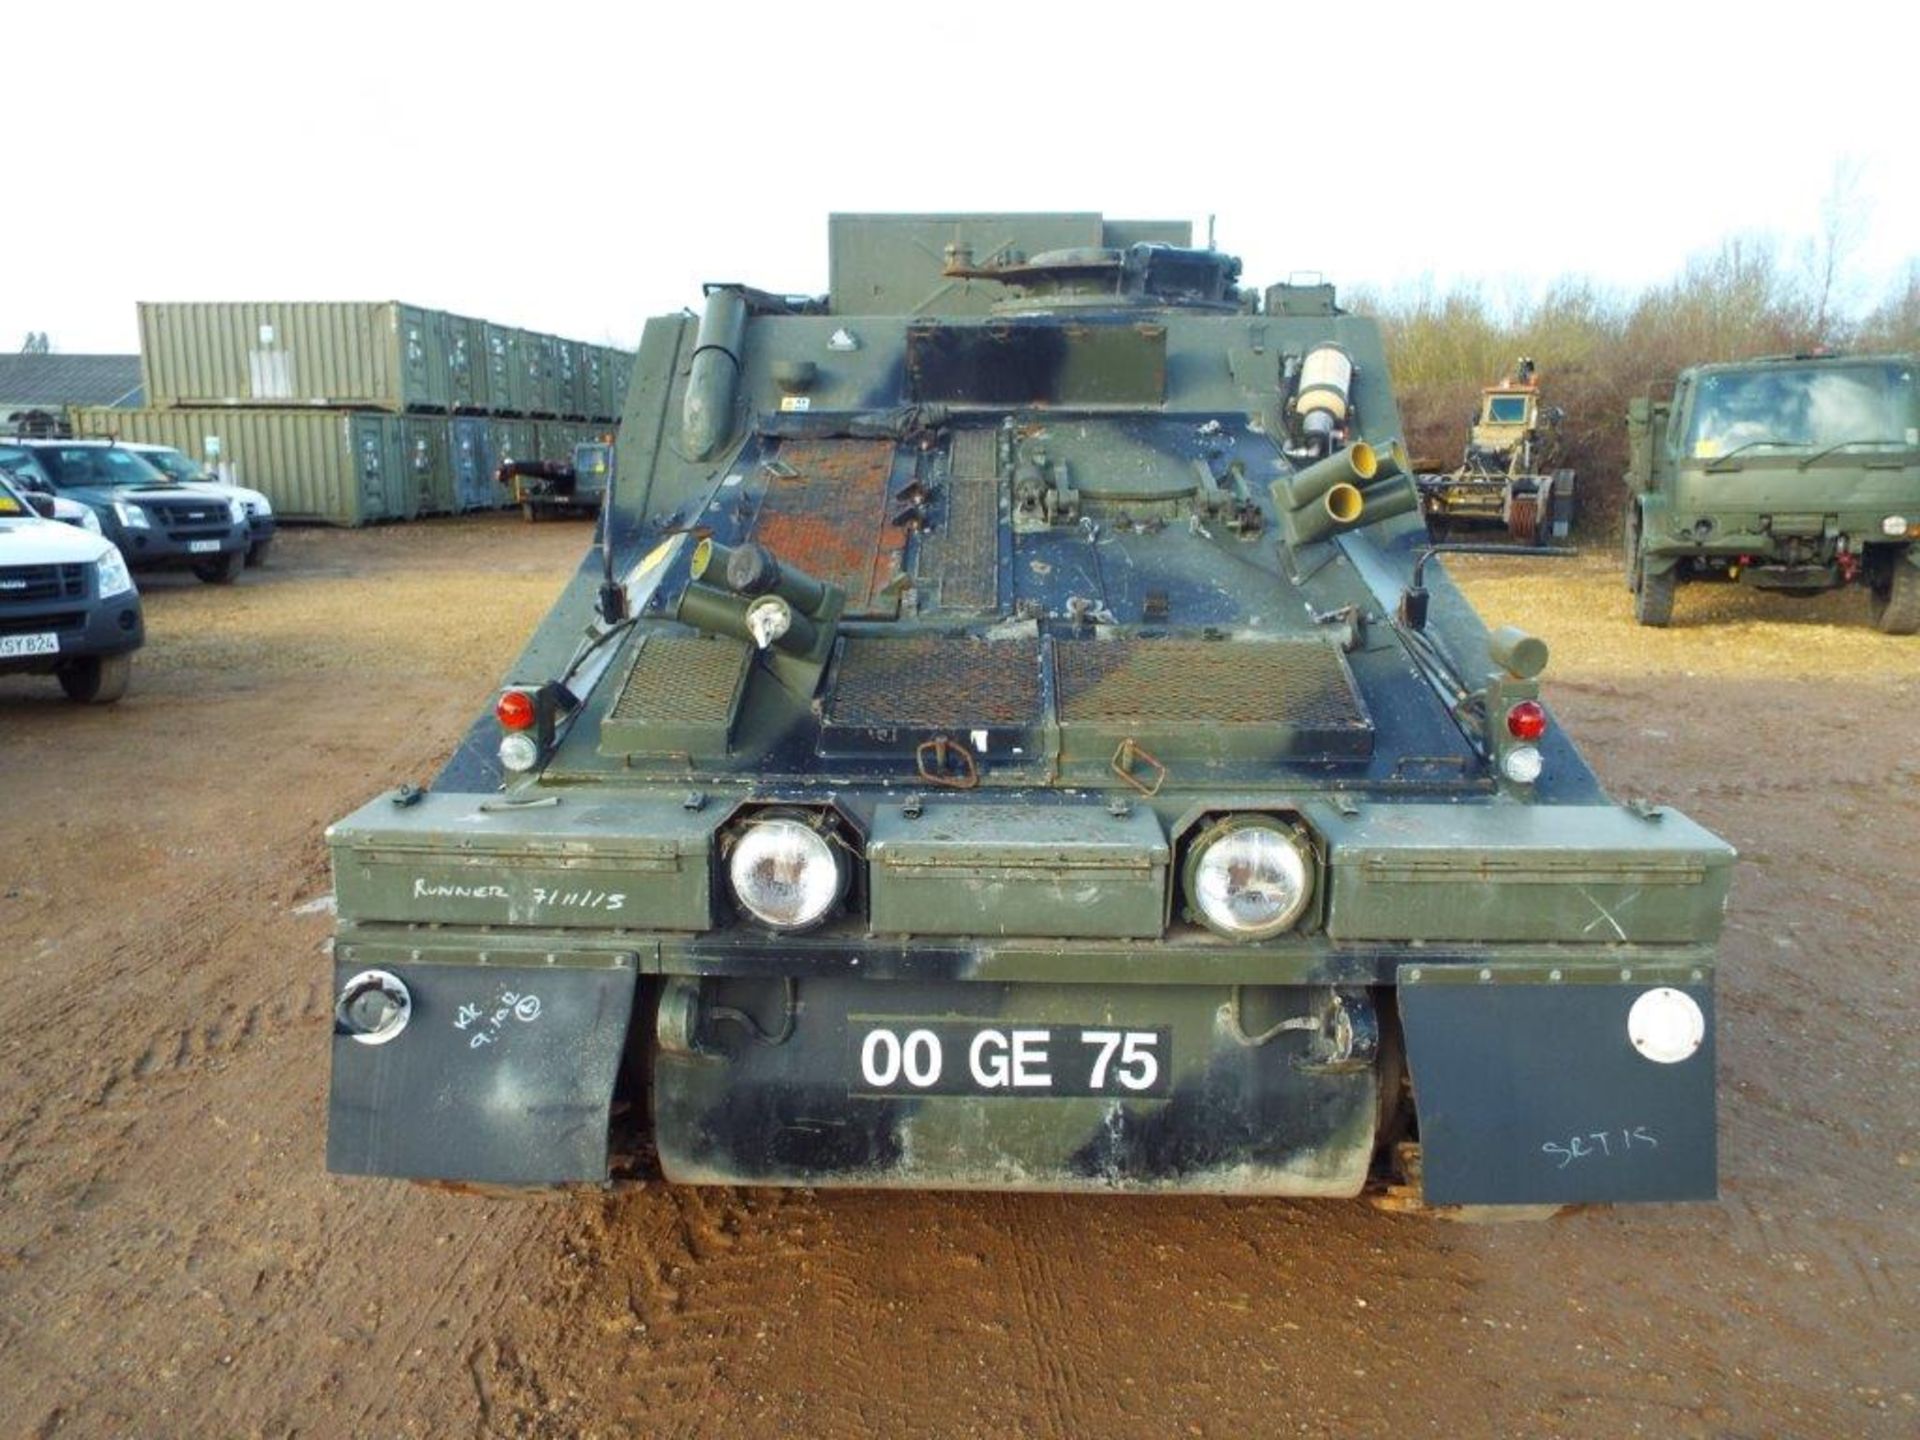 CVRT (Combat Vehicle Reconnaissance Tracked) FV105 Sultan Armoured Personnel Carrier - Image 2 of 28